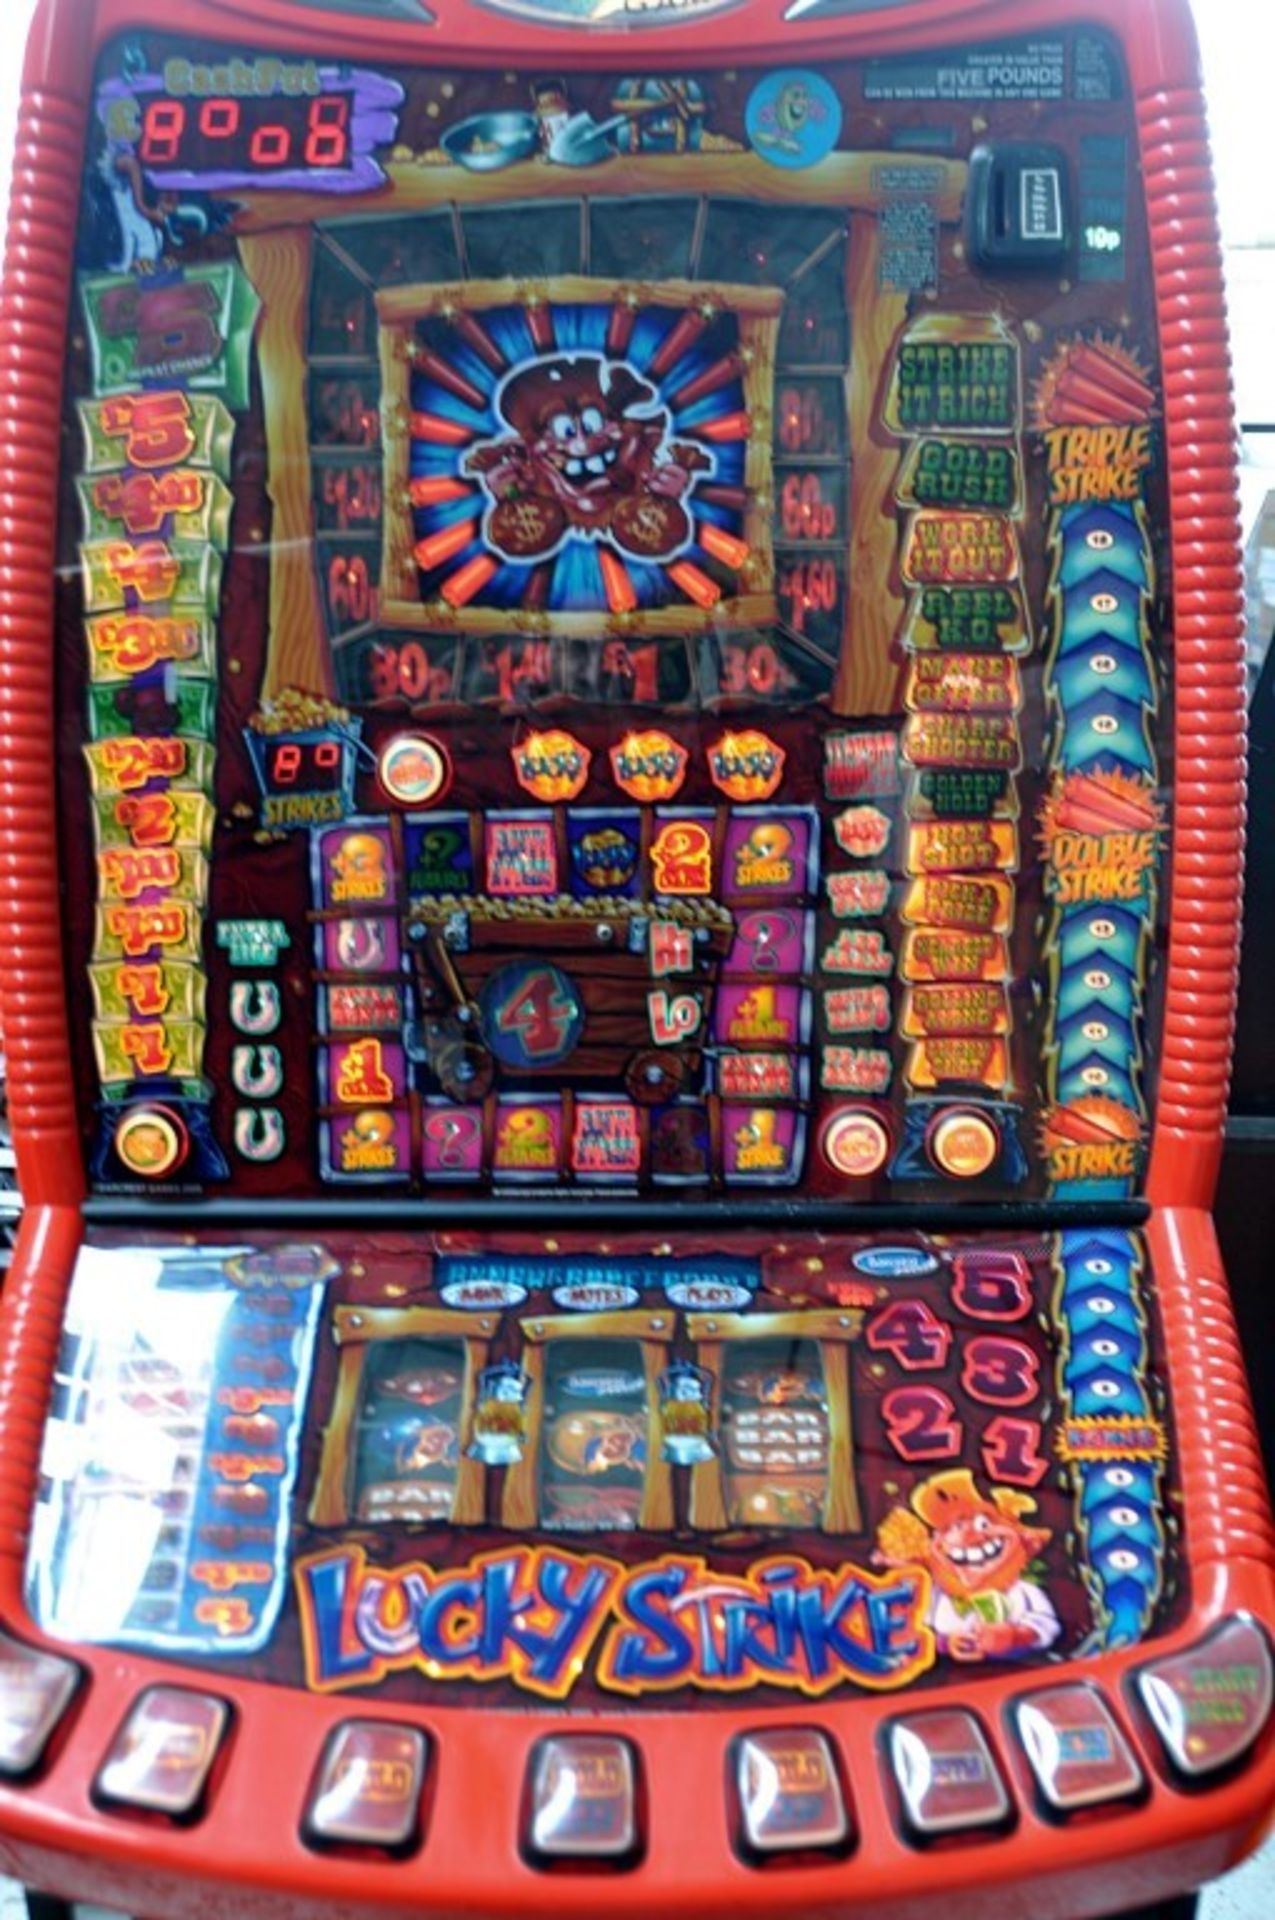 1 x "LUCKY STRIKE" Arcade Fruit Machine - Manufacturer: Barcrest (2005) - Pre-Owned In Good - Image 13 of 14